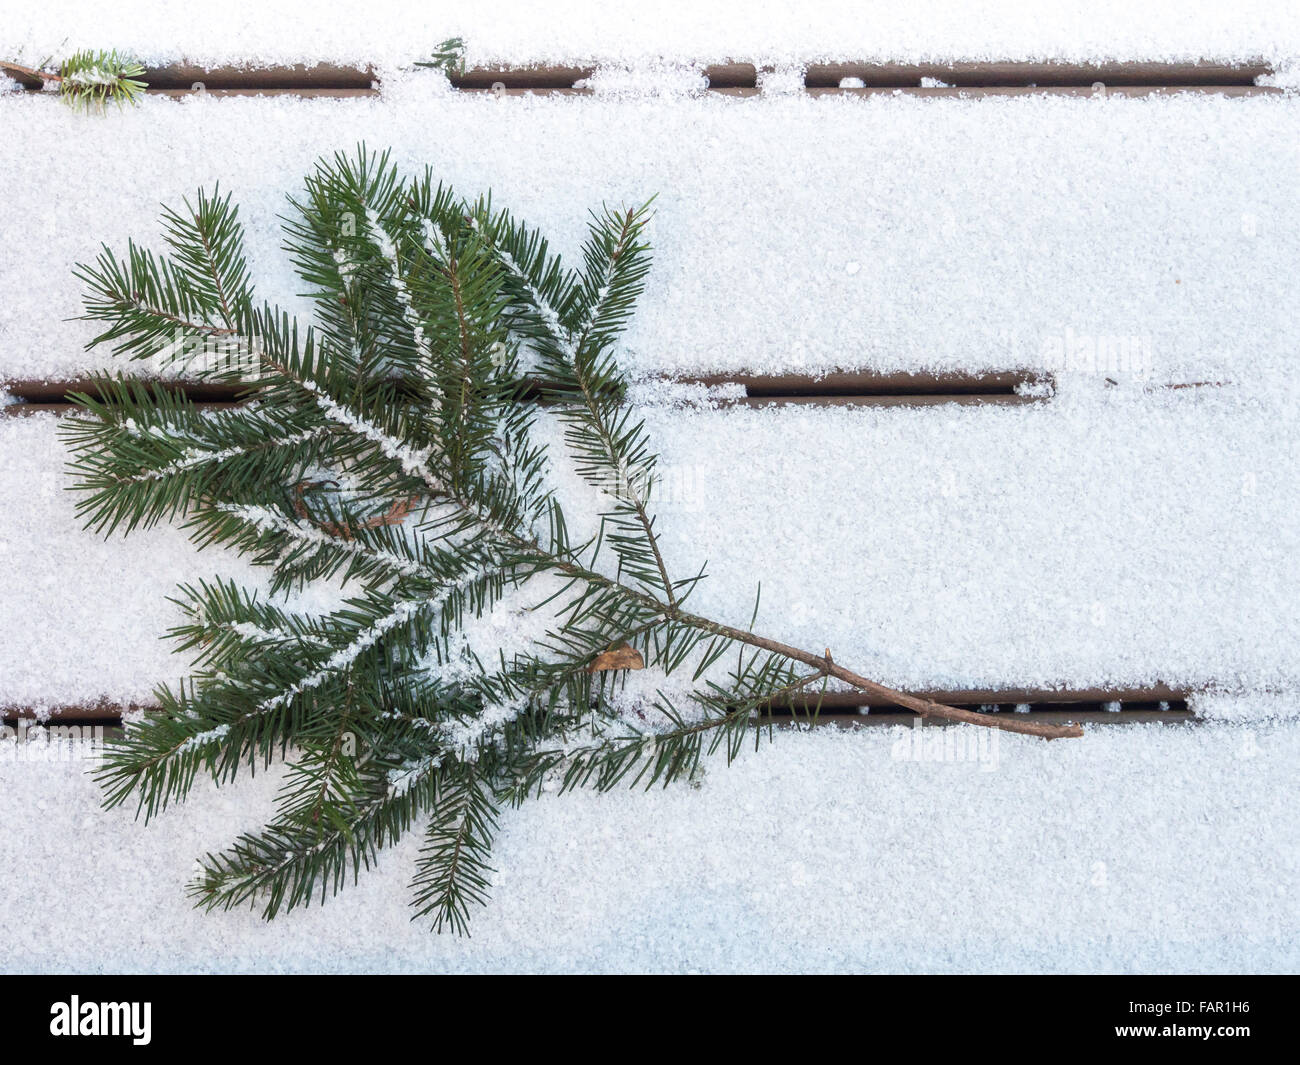 Douglas fir branch on a bed of snow pointing up to the left corner. It fills half the left side of the frame. Stock Photo